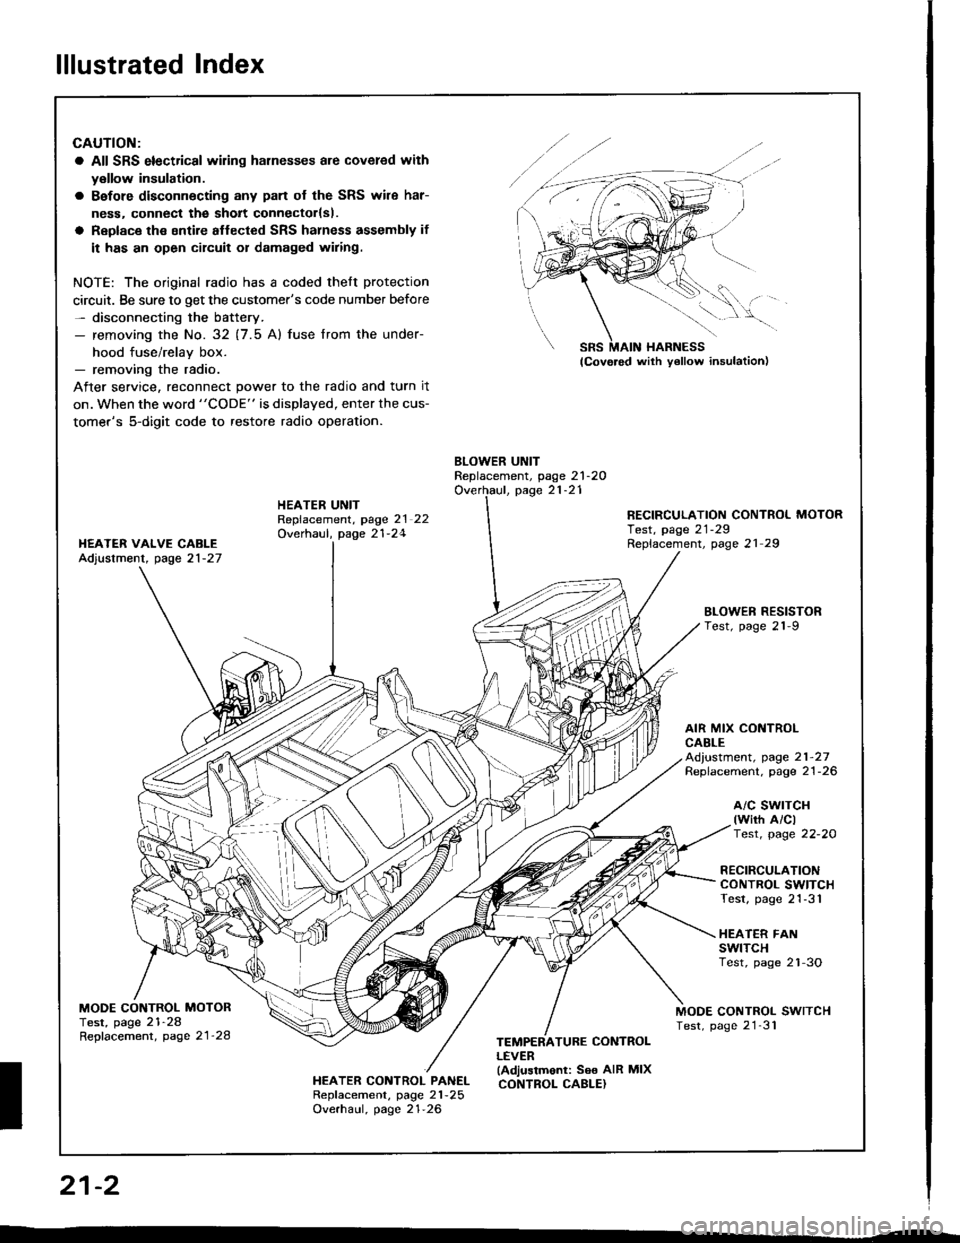 HONDA INTEGRA 1994 4.G Owners Guide lllustrated Index
CAUTION:
a All SRS electrical wiling harnesses are covered with
y€llow insulation.
a Bafore disconnecting any pan of the SRS wile har-
ness. connect the sholt connectorlsl.
a Repla